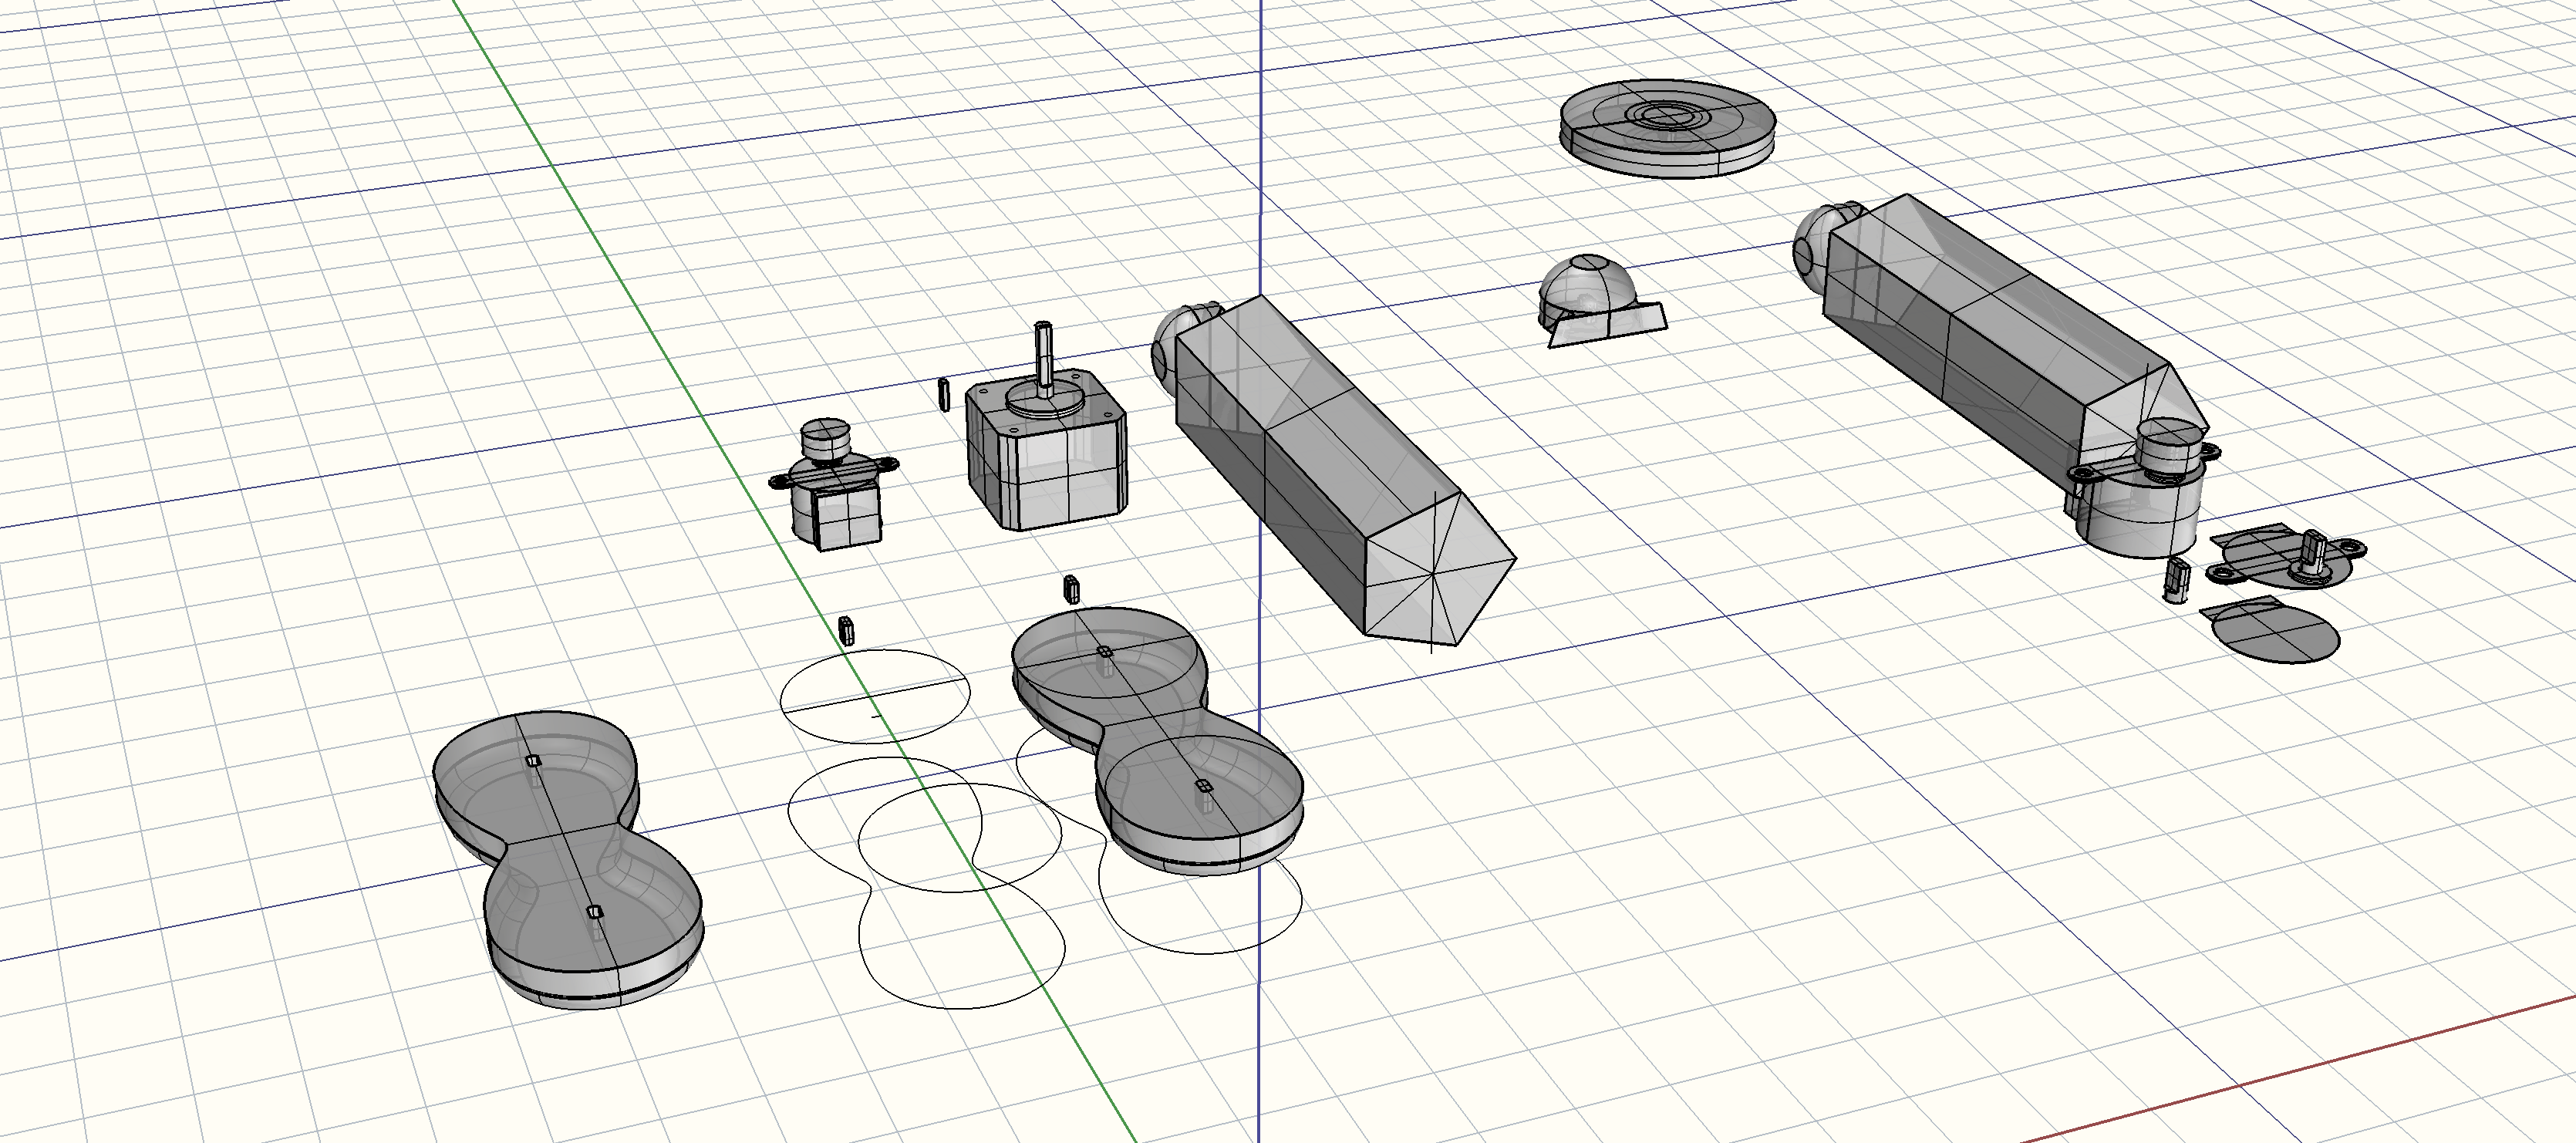 Building a Robot Arm Part 1: Designing the Arm with CAD Software